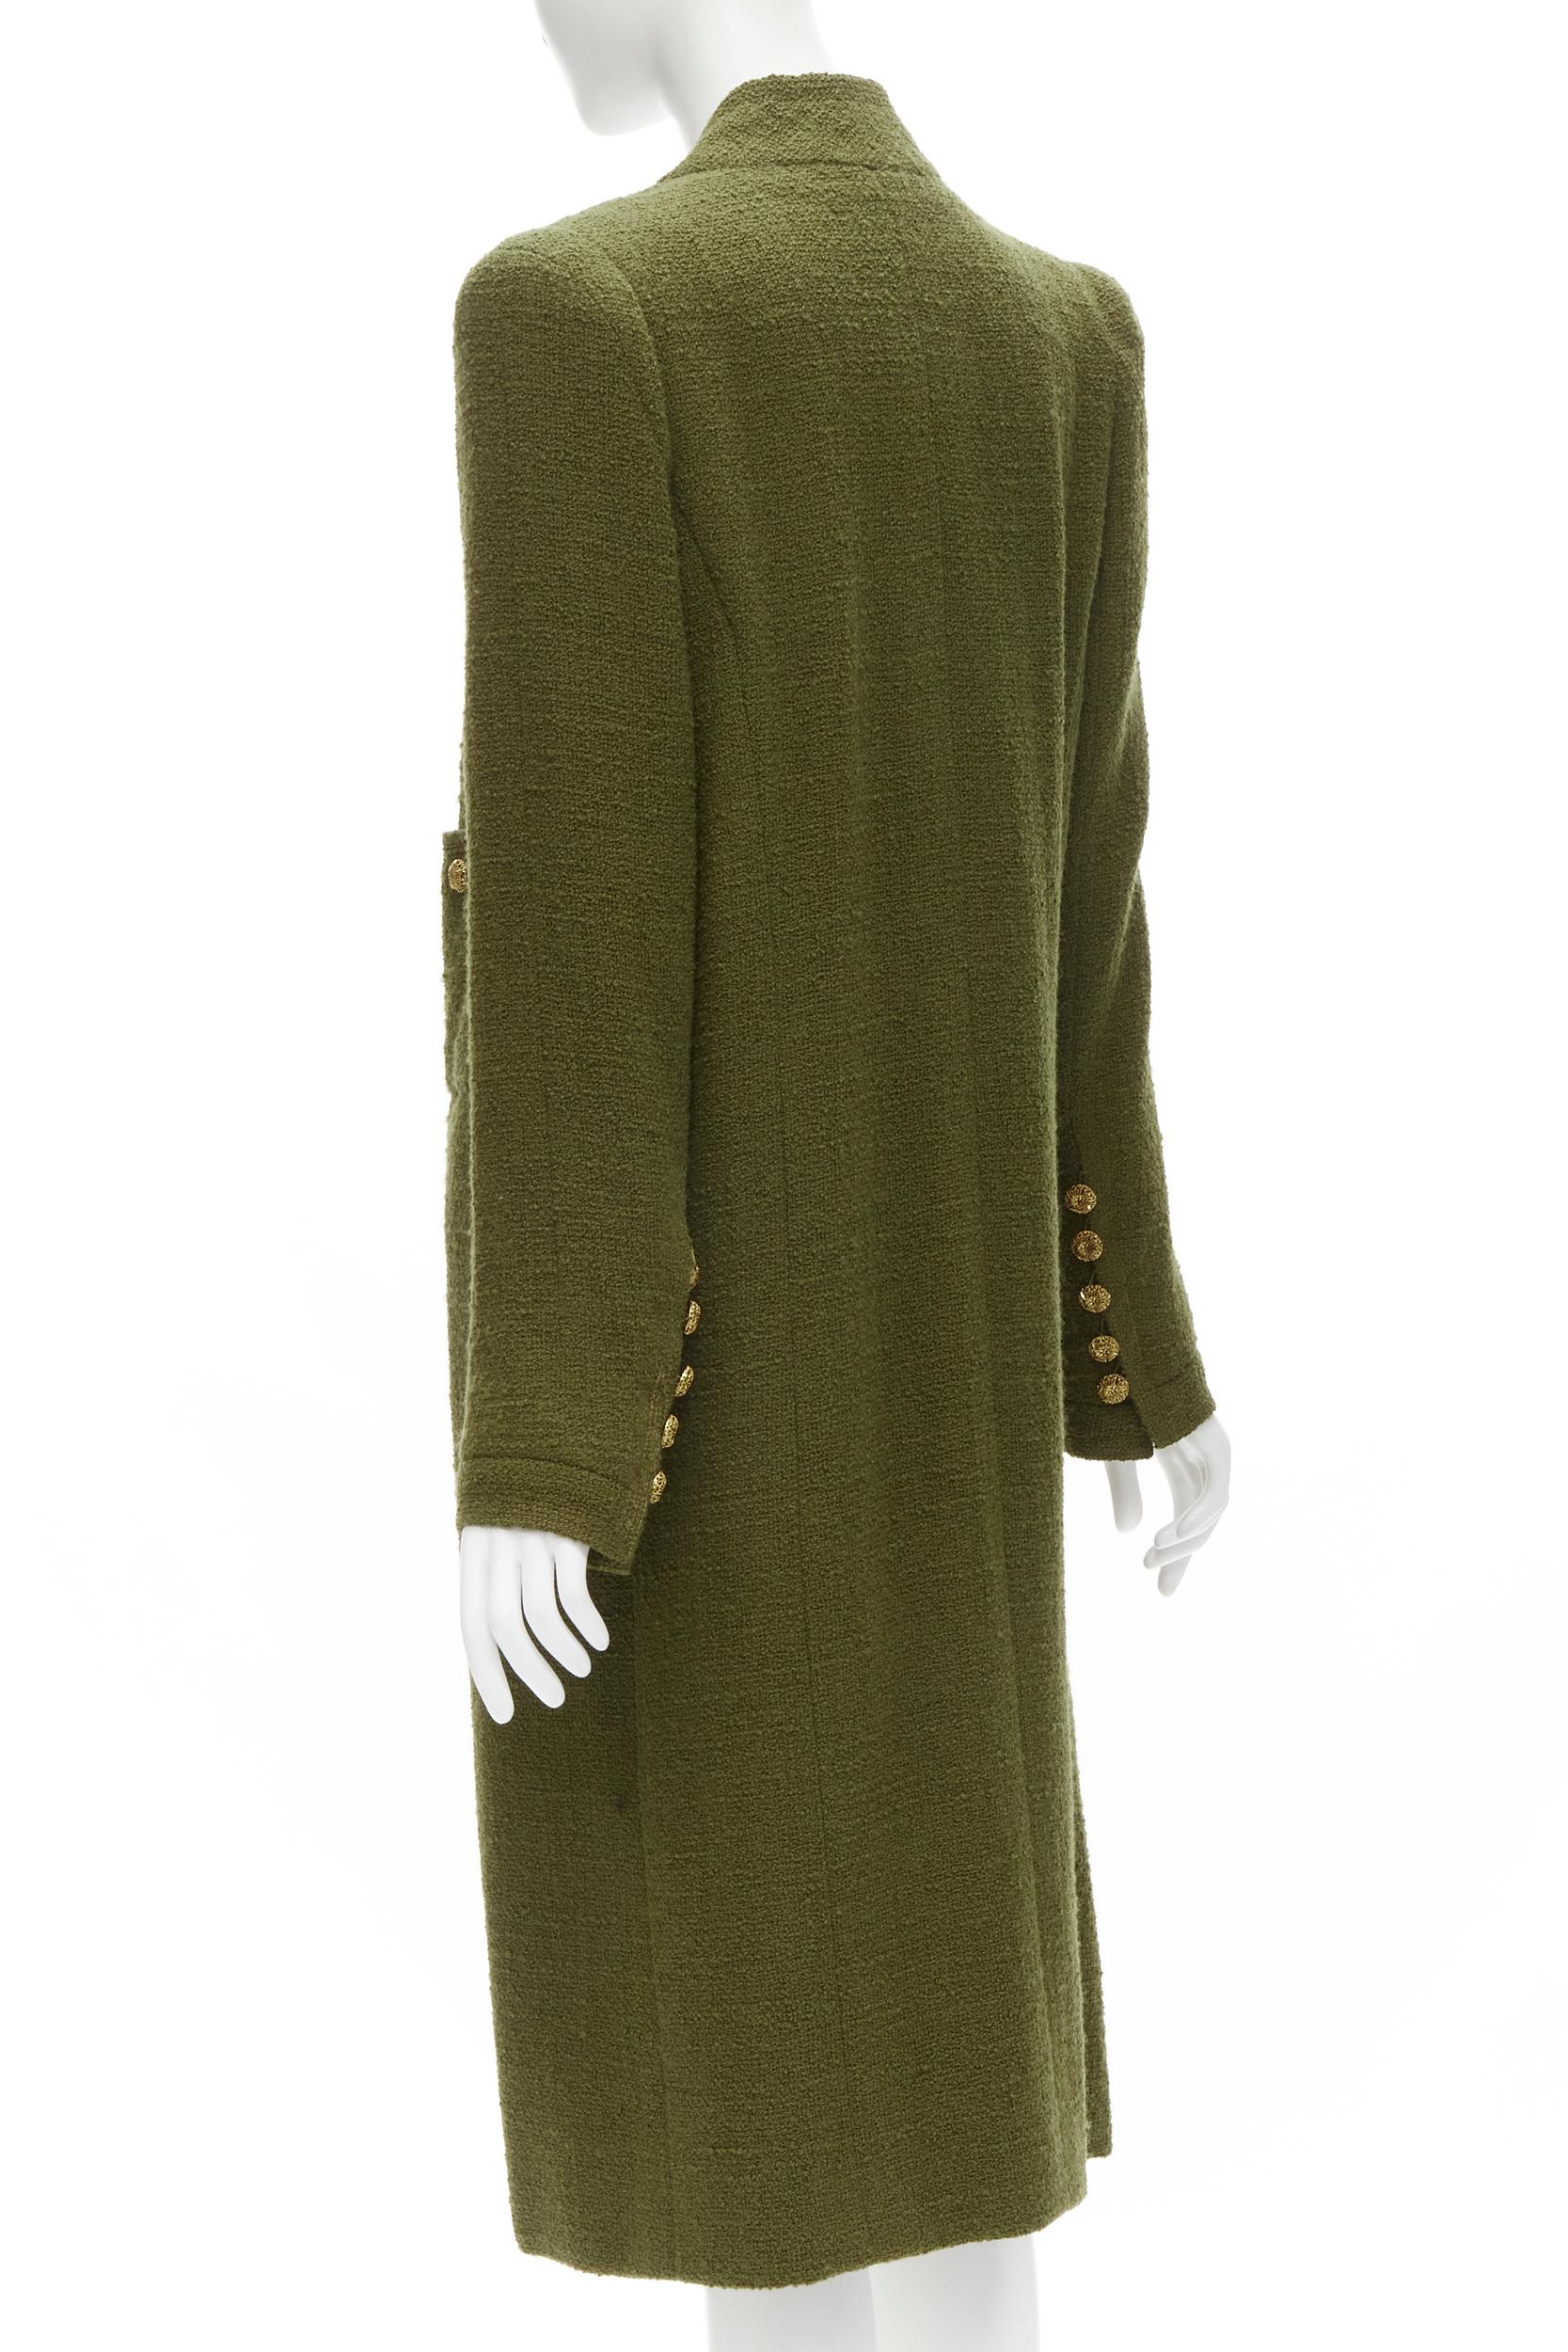 CHANEL COUTURE 96A green tweed gold filigree floral button long coat US6 M For Sale 2